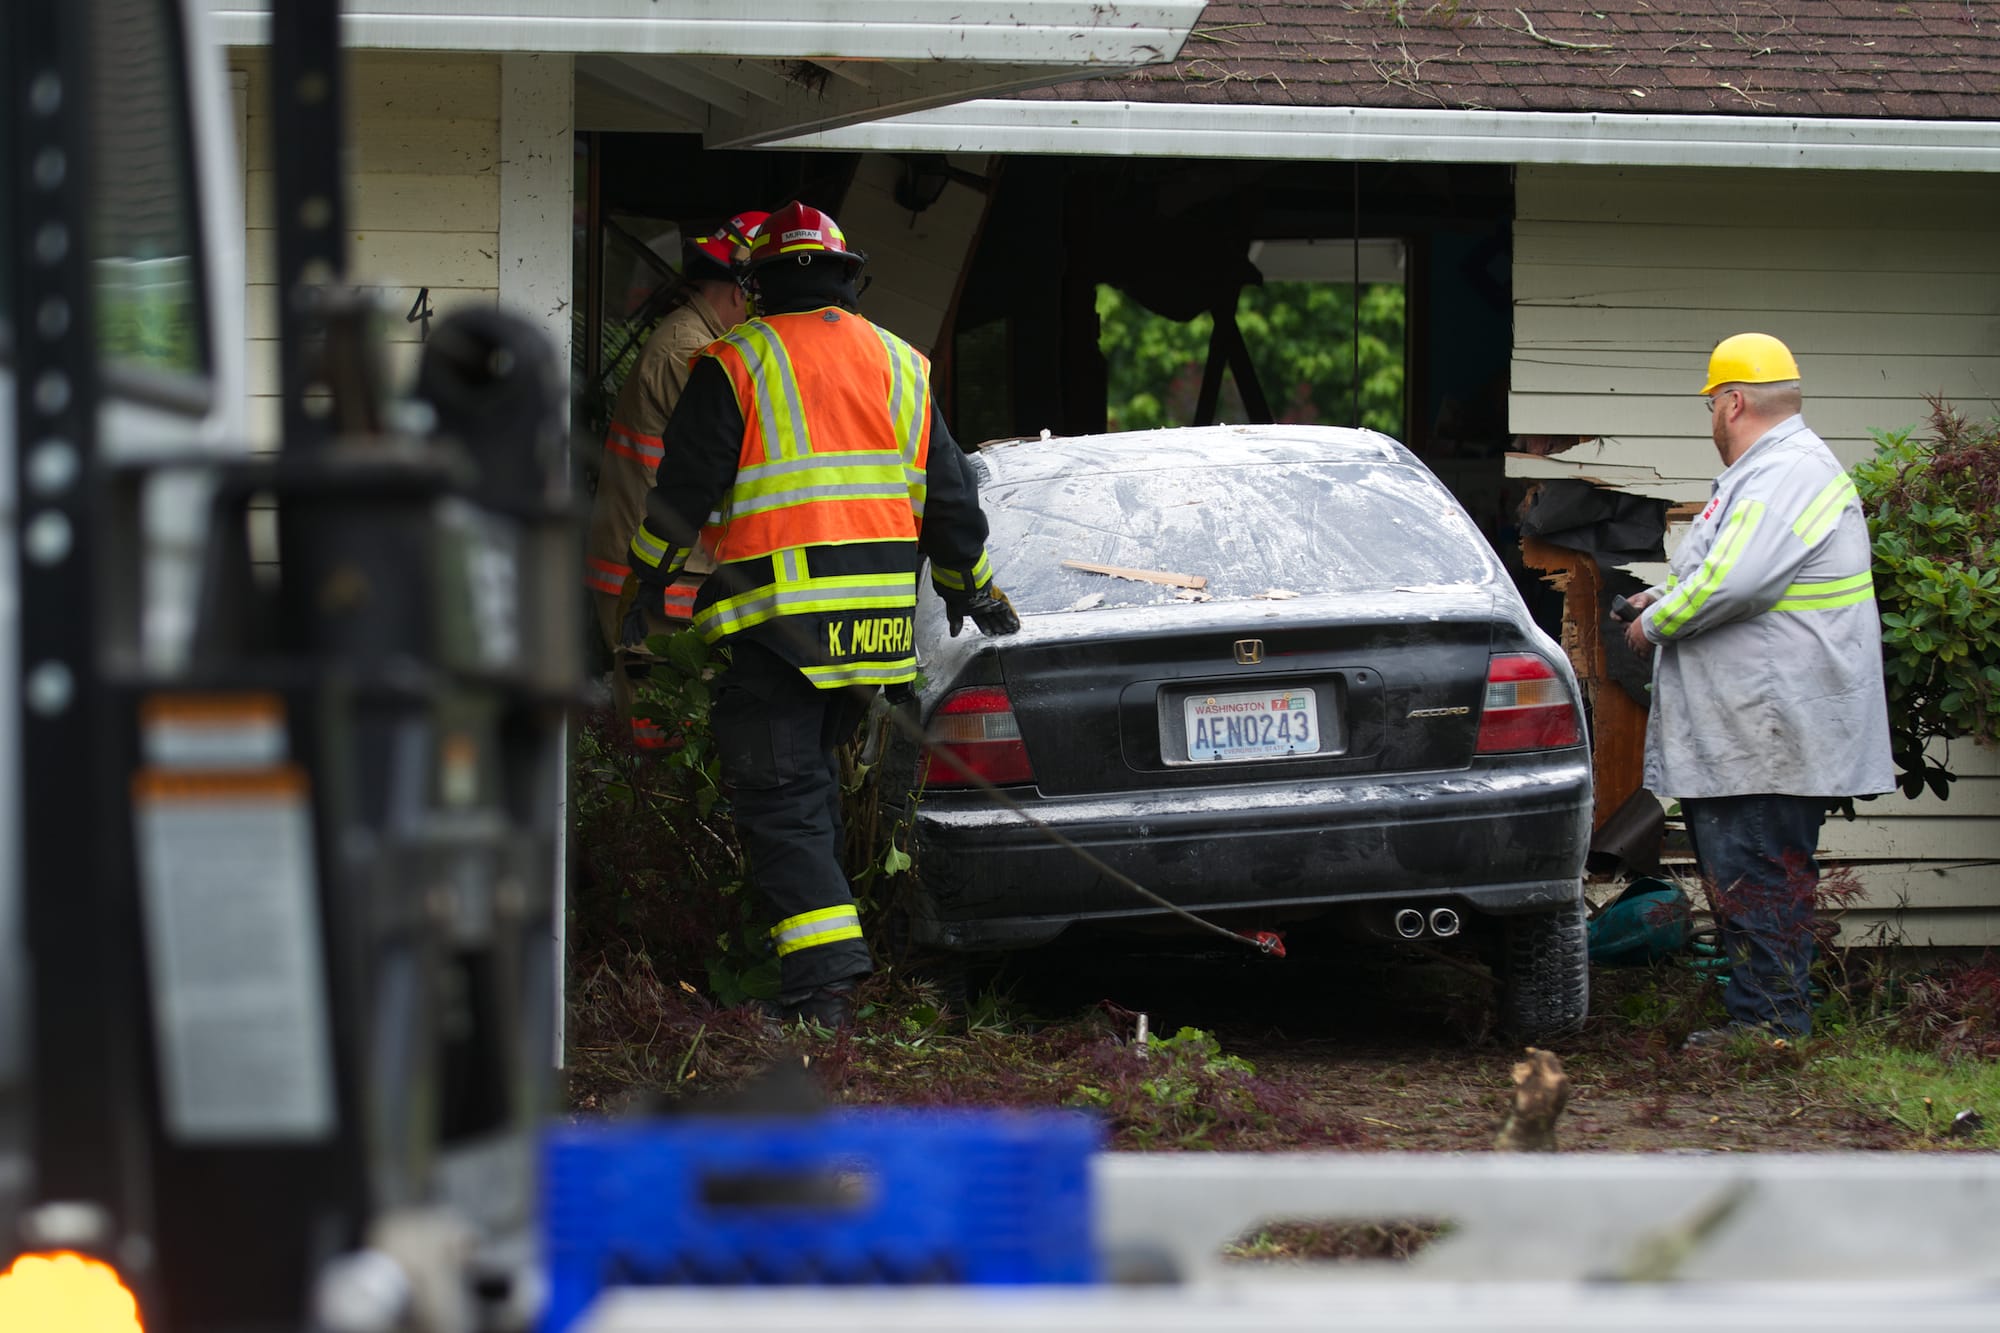 Crews work to remove a car that plowed into an east Vancouver house in the early morning hours on Wednesday, June 18, 2014.